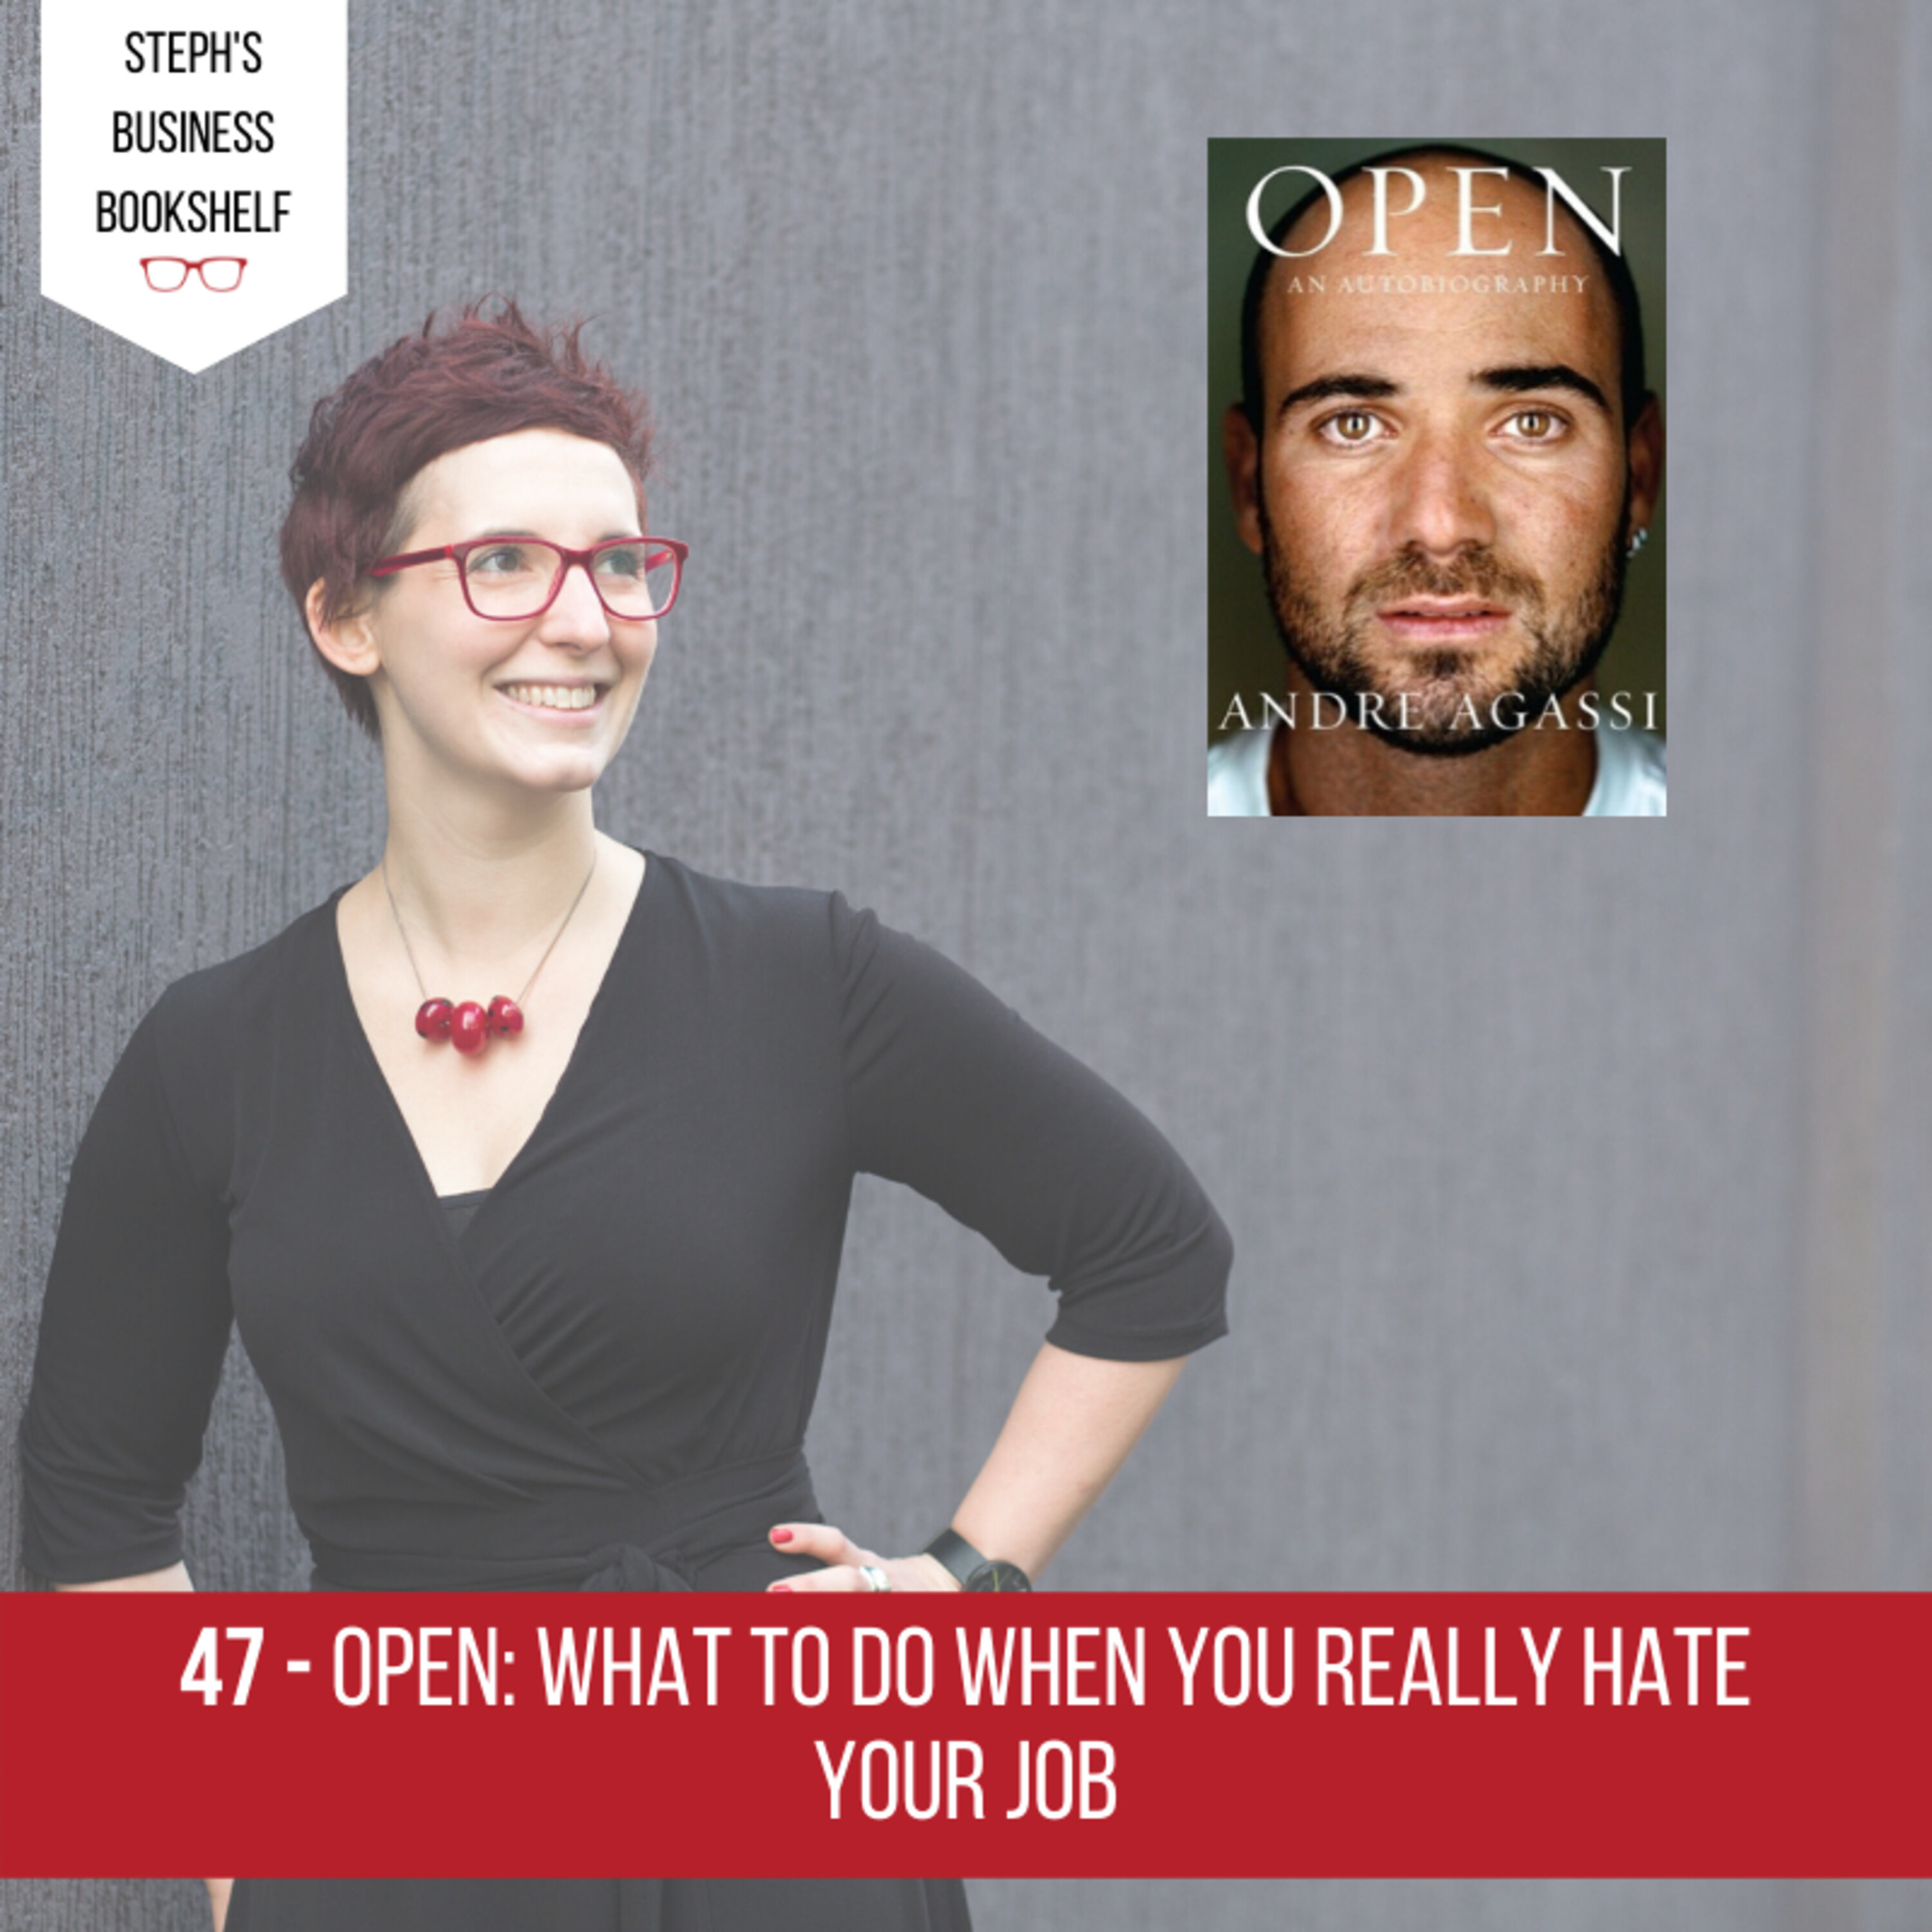 Open by Andre Agassi: what to do when you really hate your job